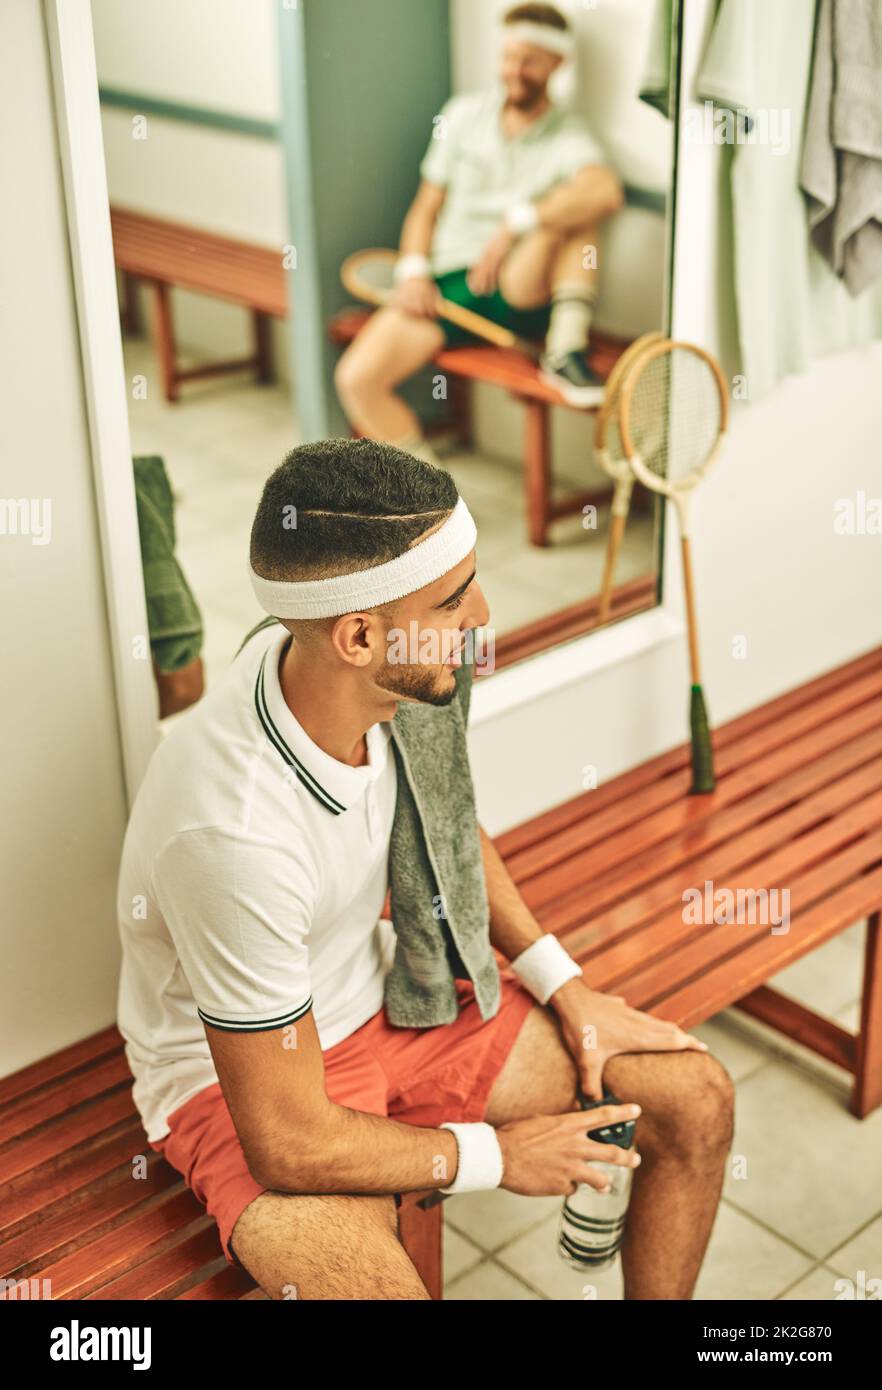 All about that squash life. Shot of a young man taking a break in the locker room after a game of squash. Stock Photo